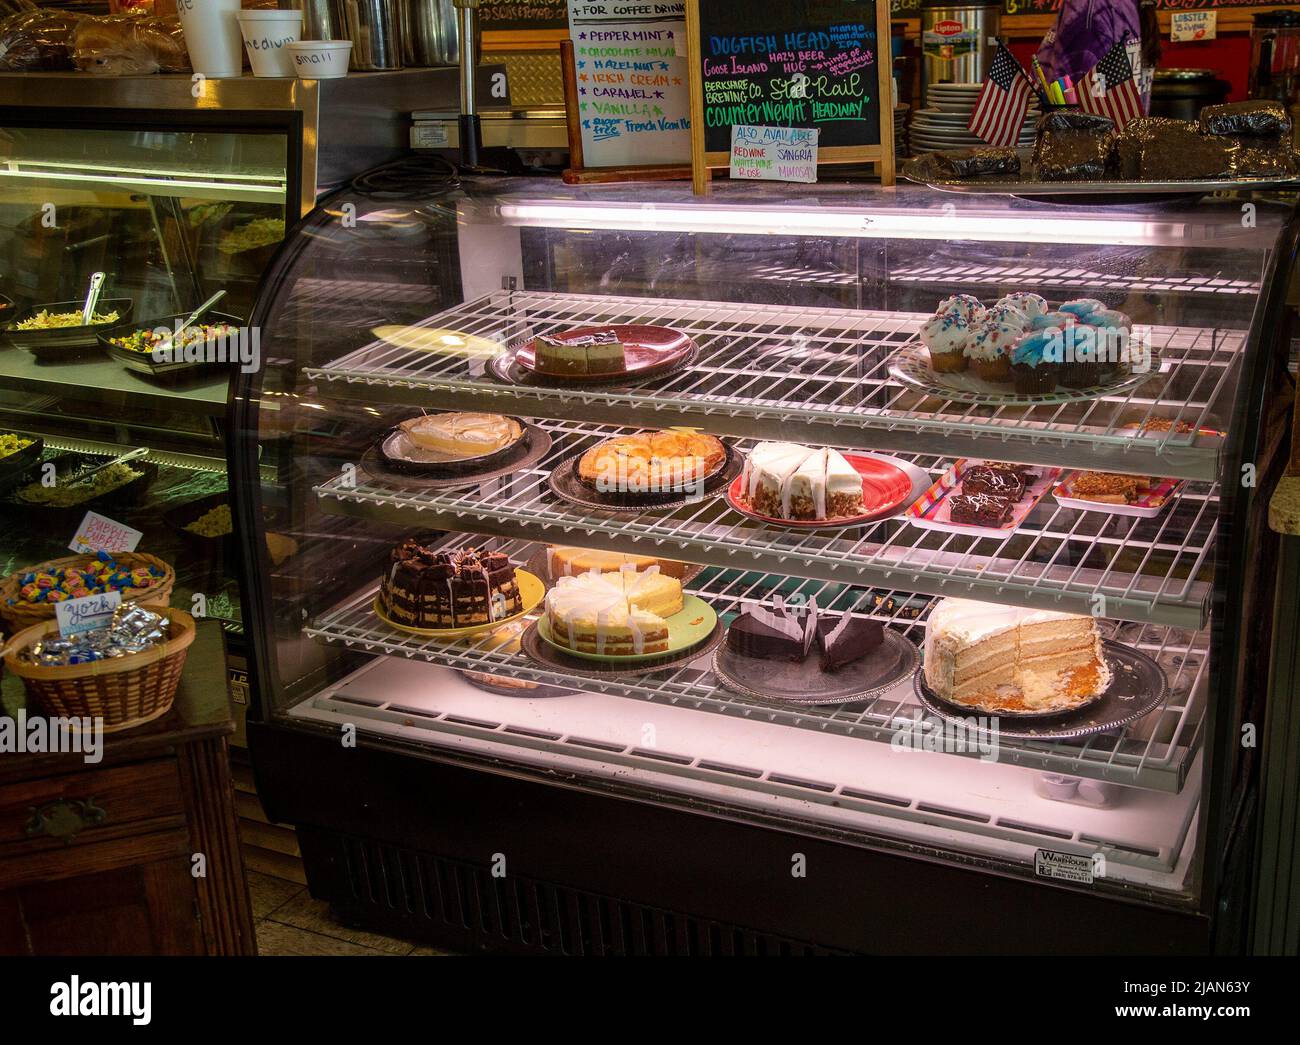 Cakes on display at a restaurant Stock Photo